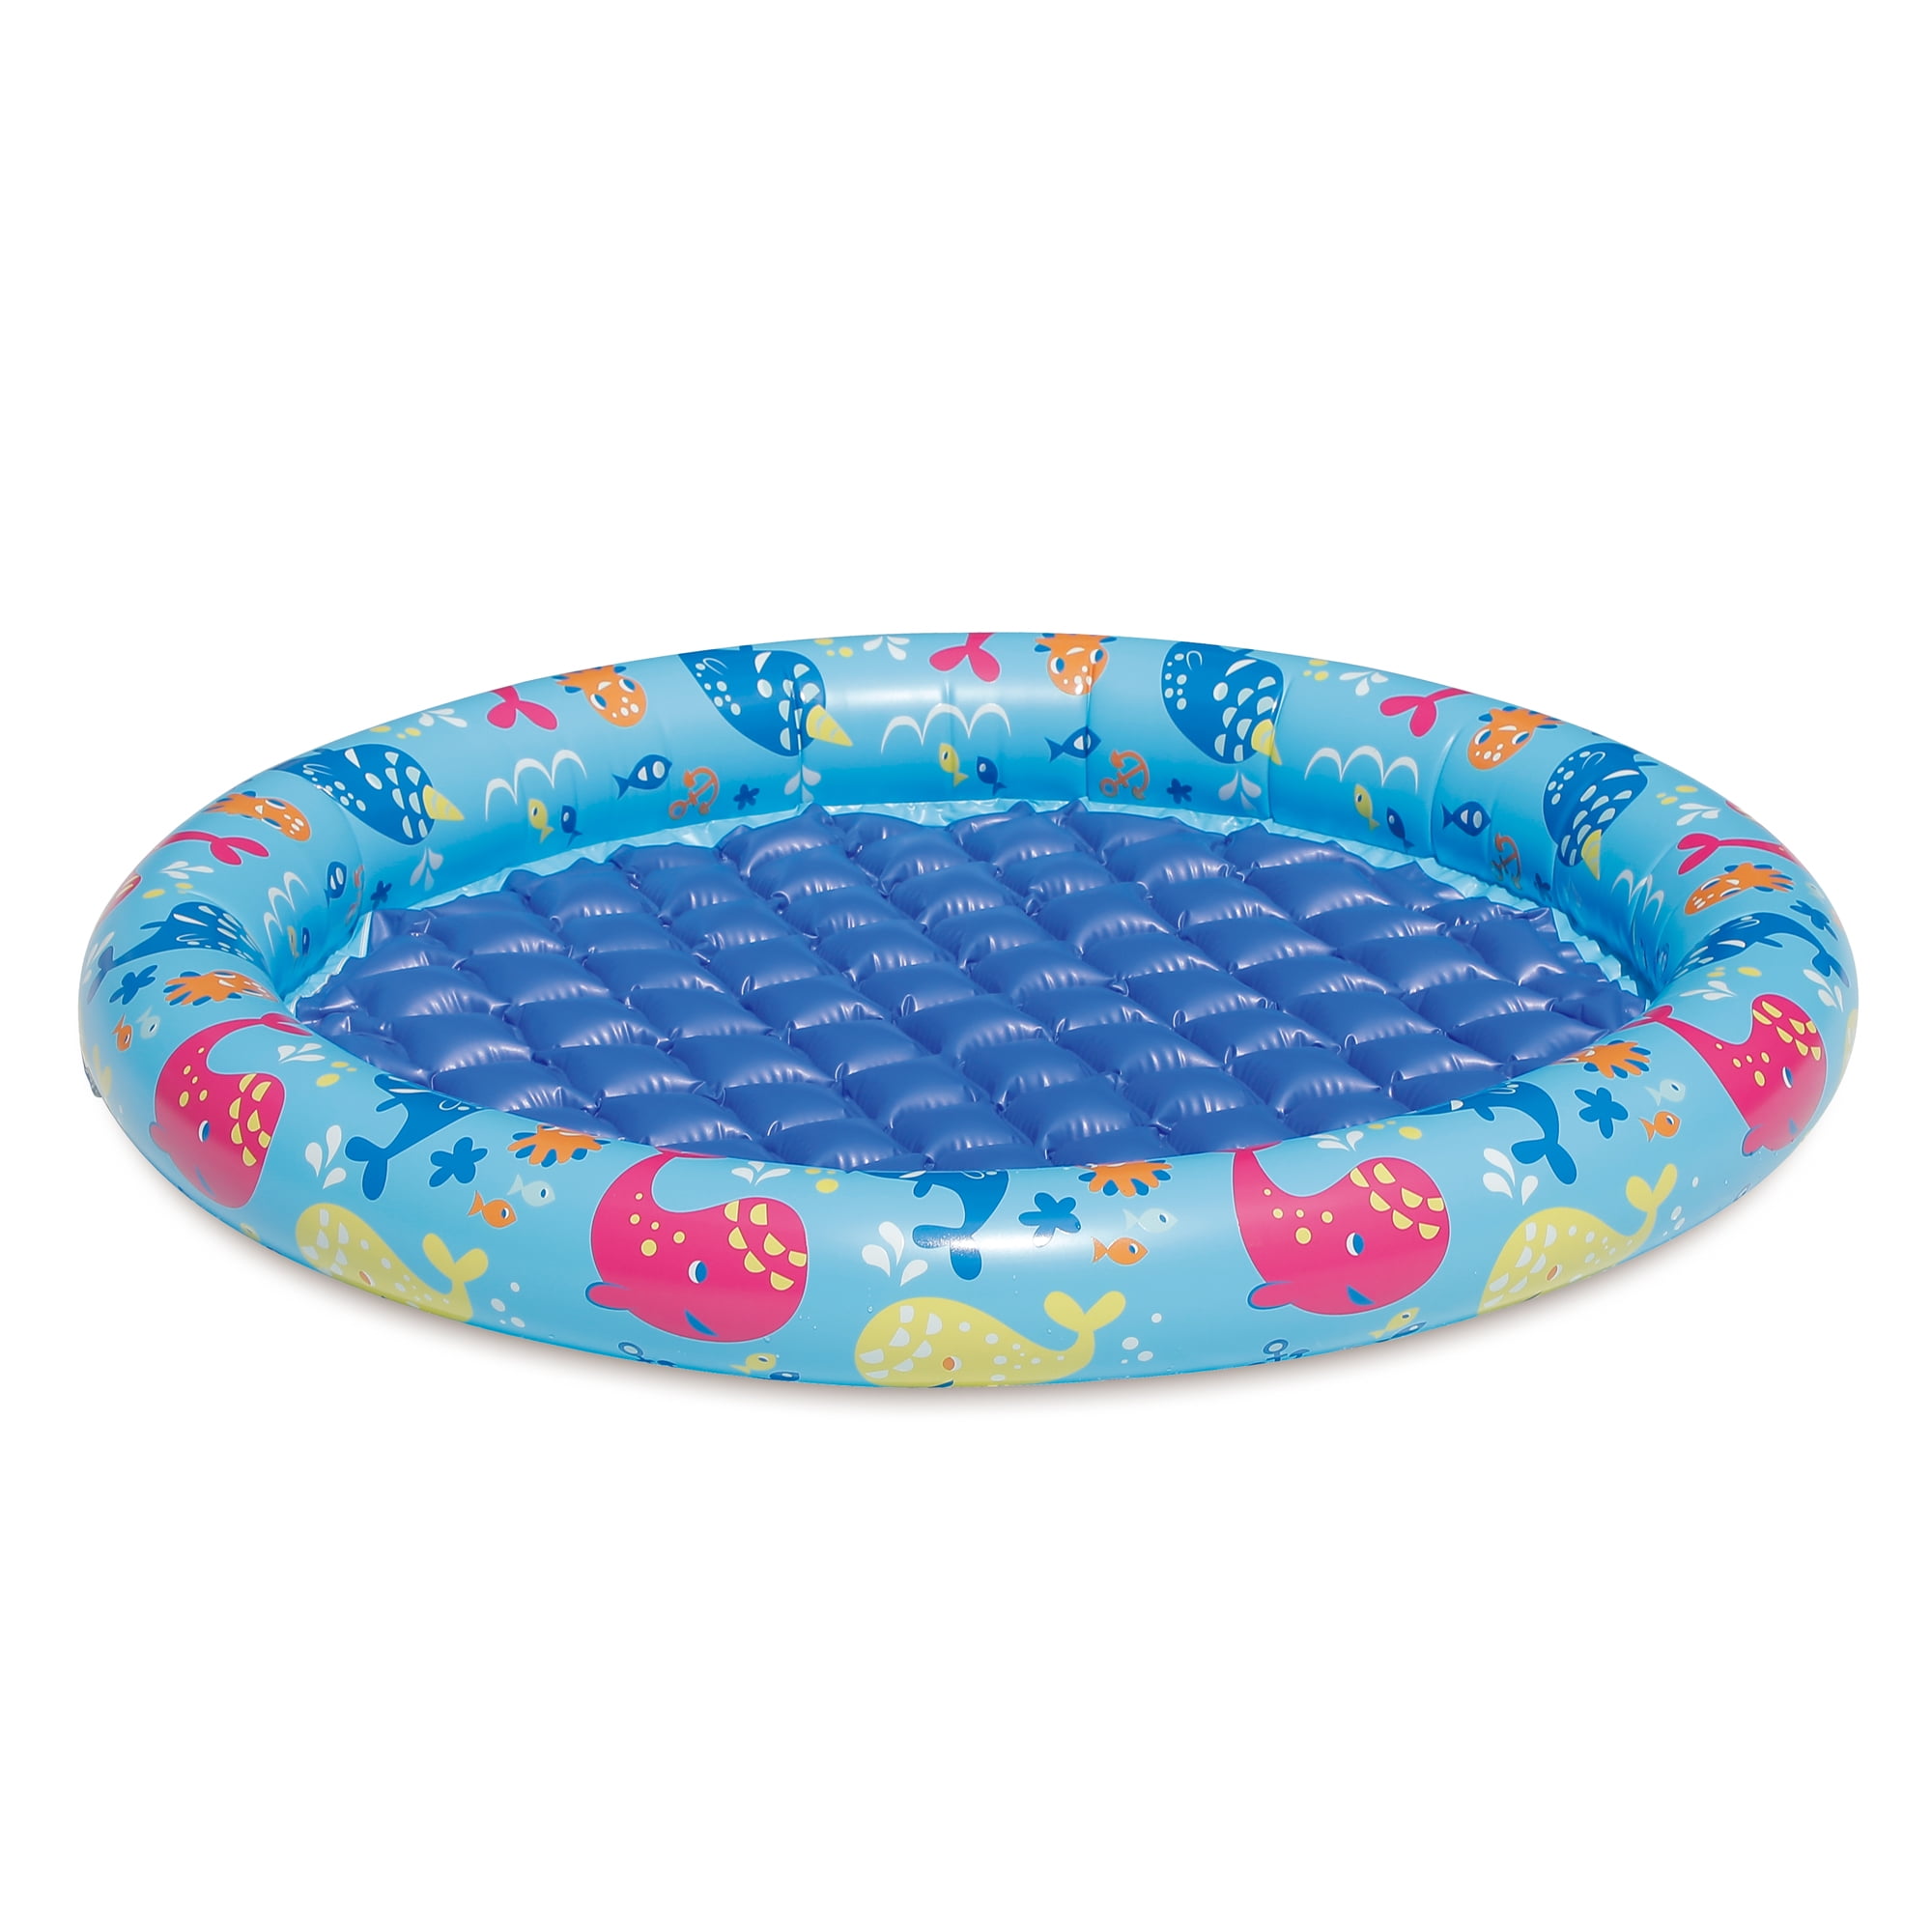 1 ring inflatable pool